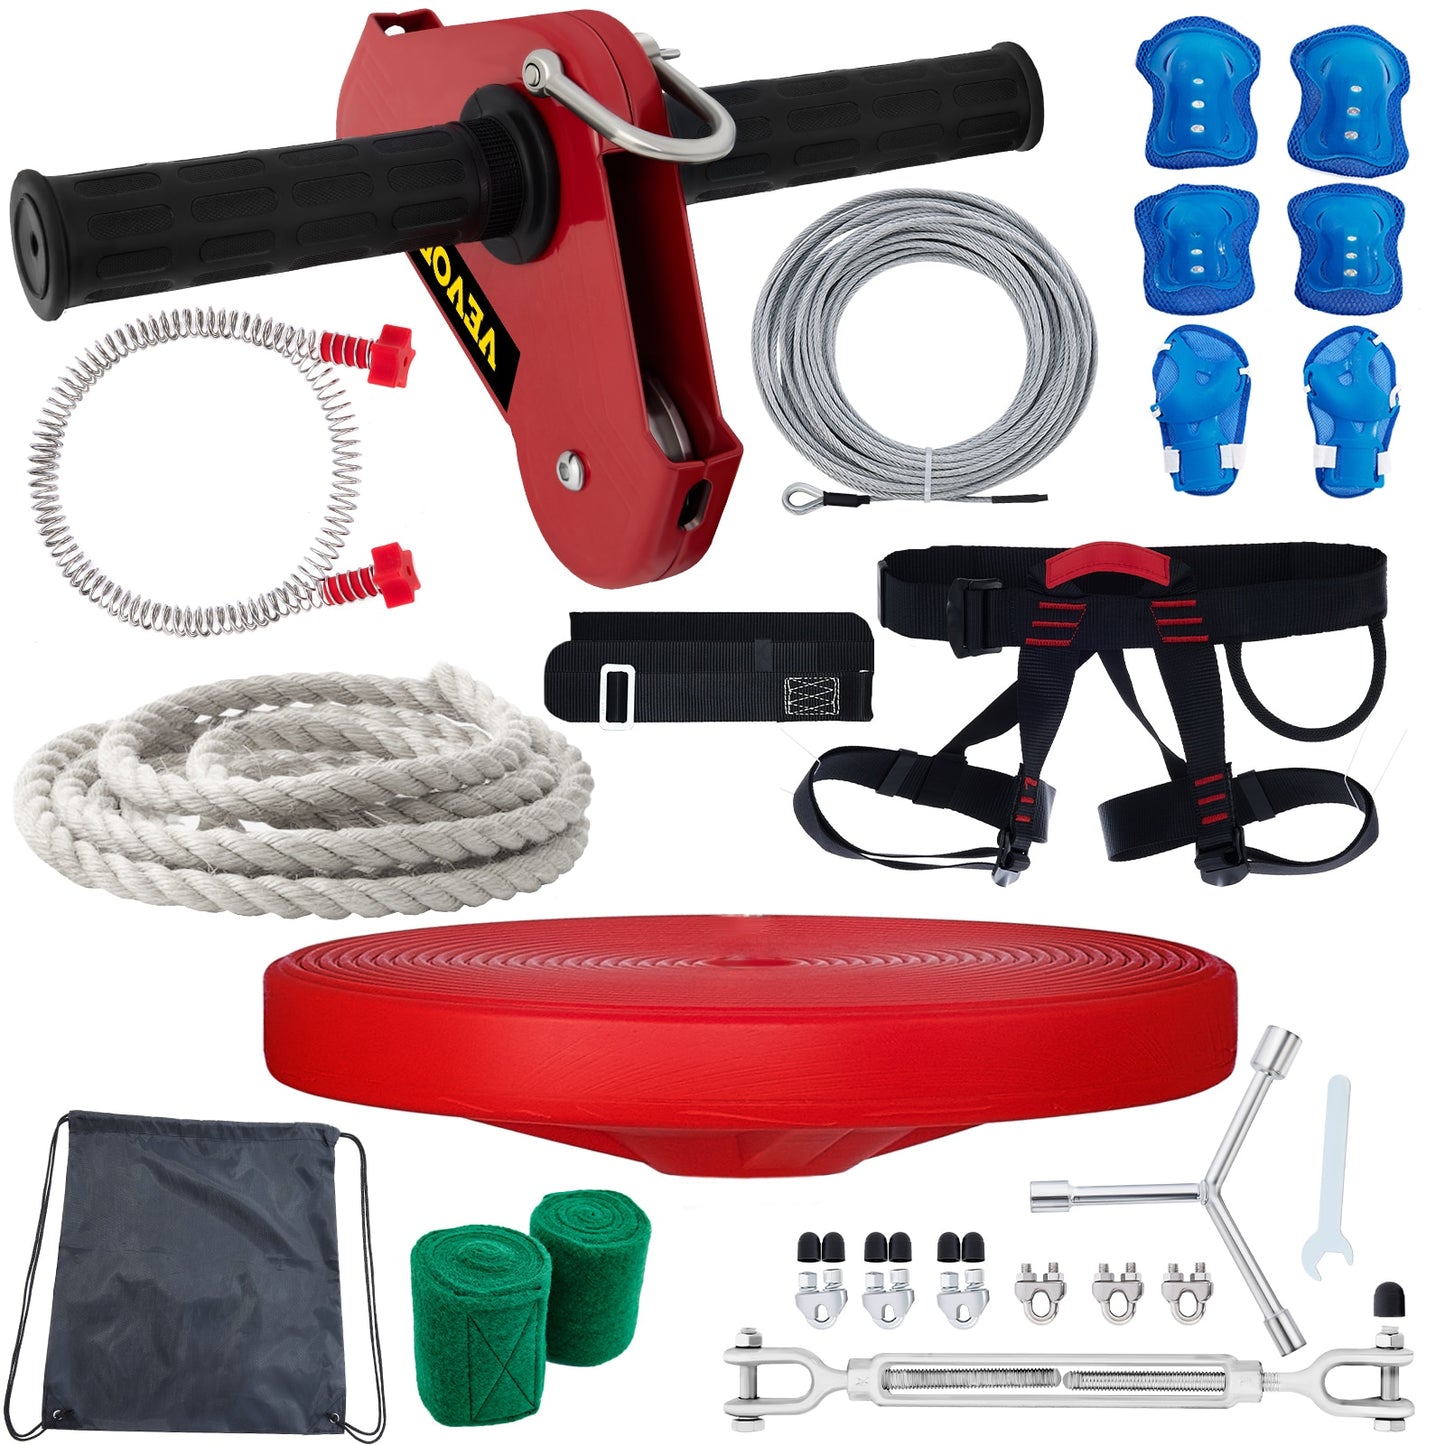 Zip line Kits, Swing Seat Brake Cable and Trolley, 90/100/110/120/150/160FT